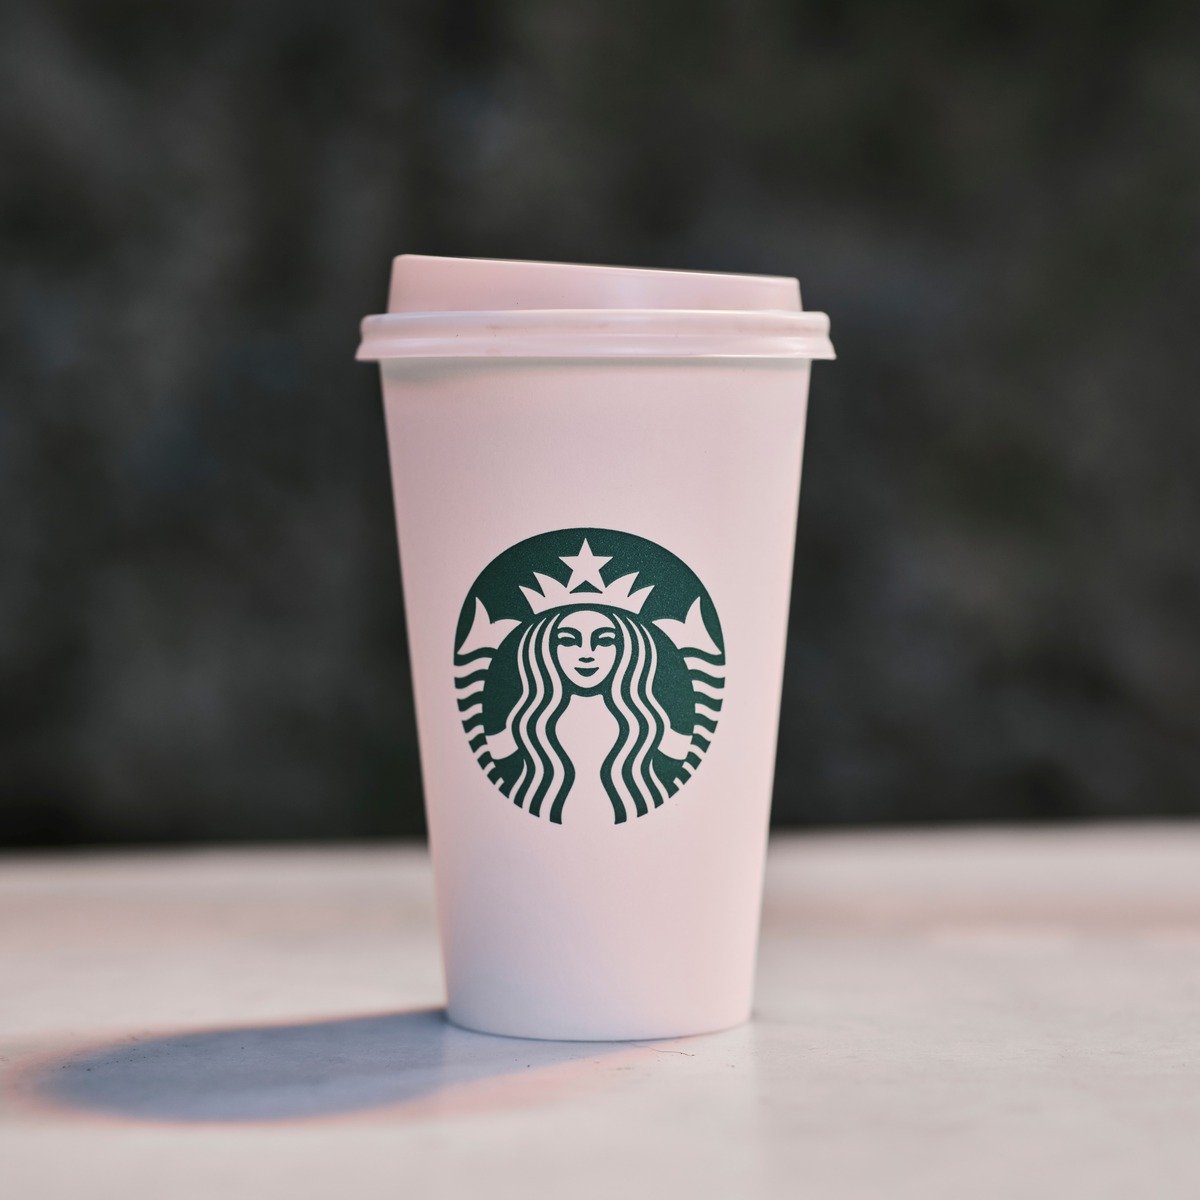 starbucks paper takeaway cup on surface